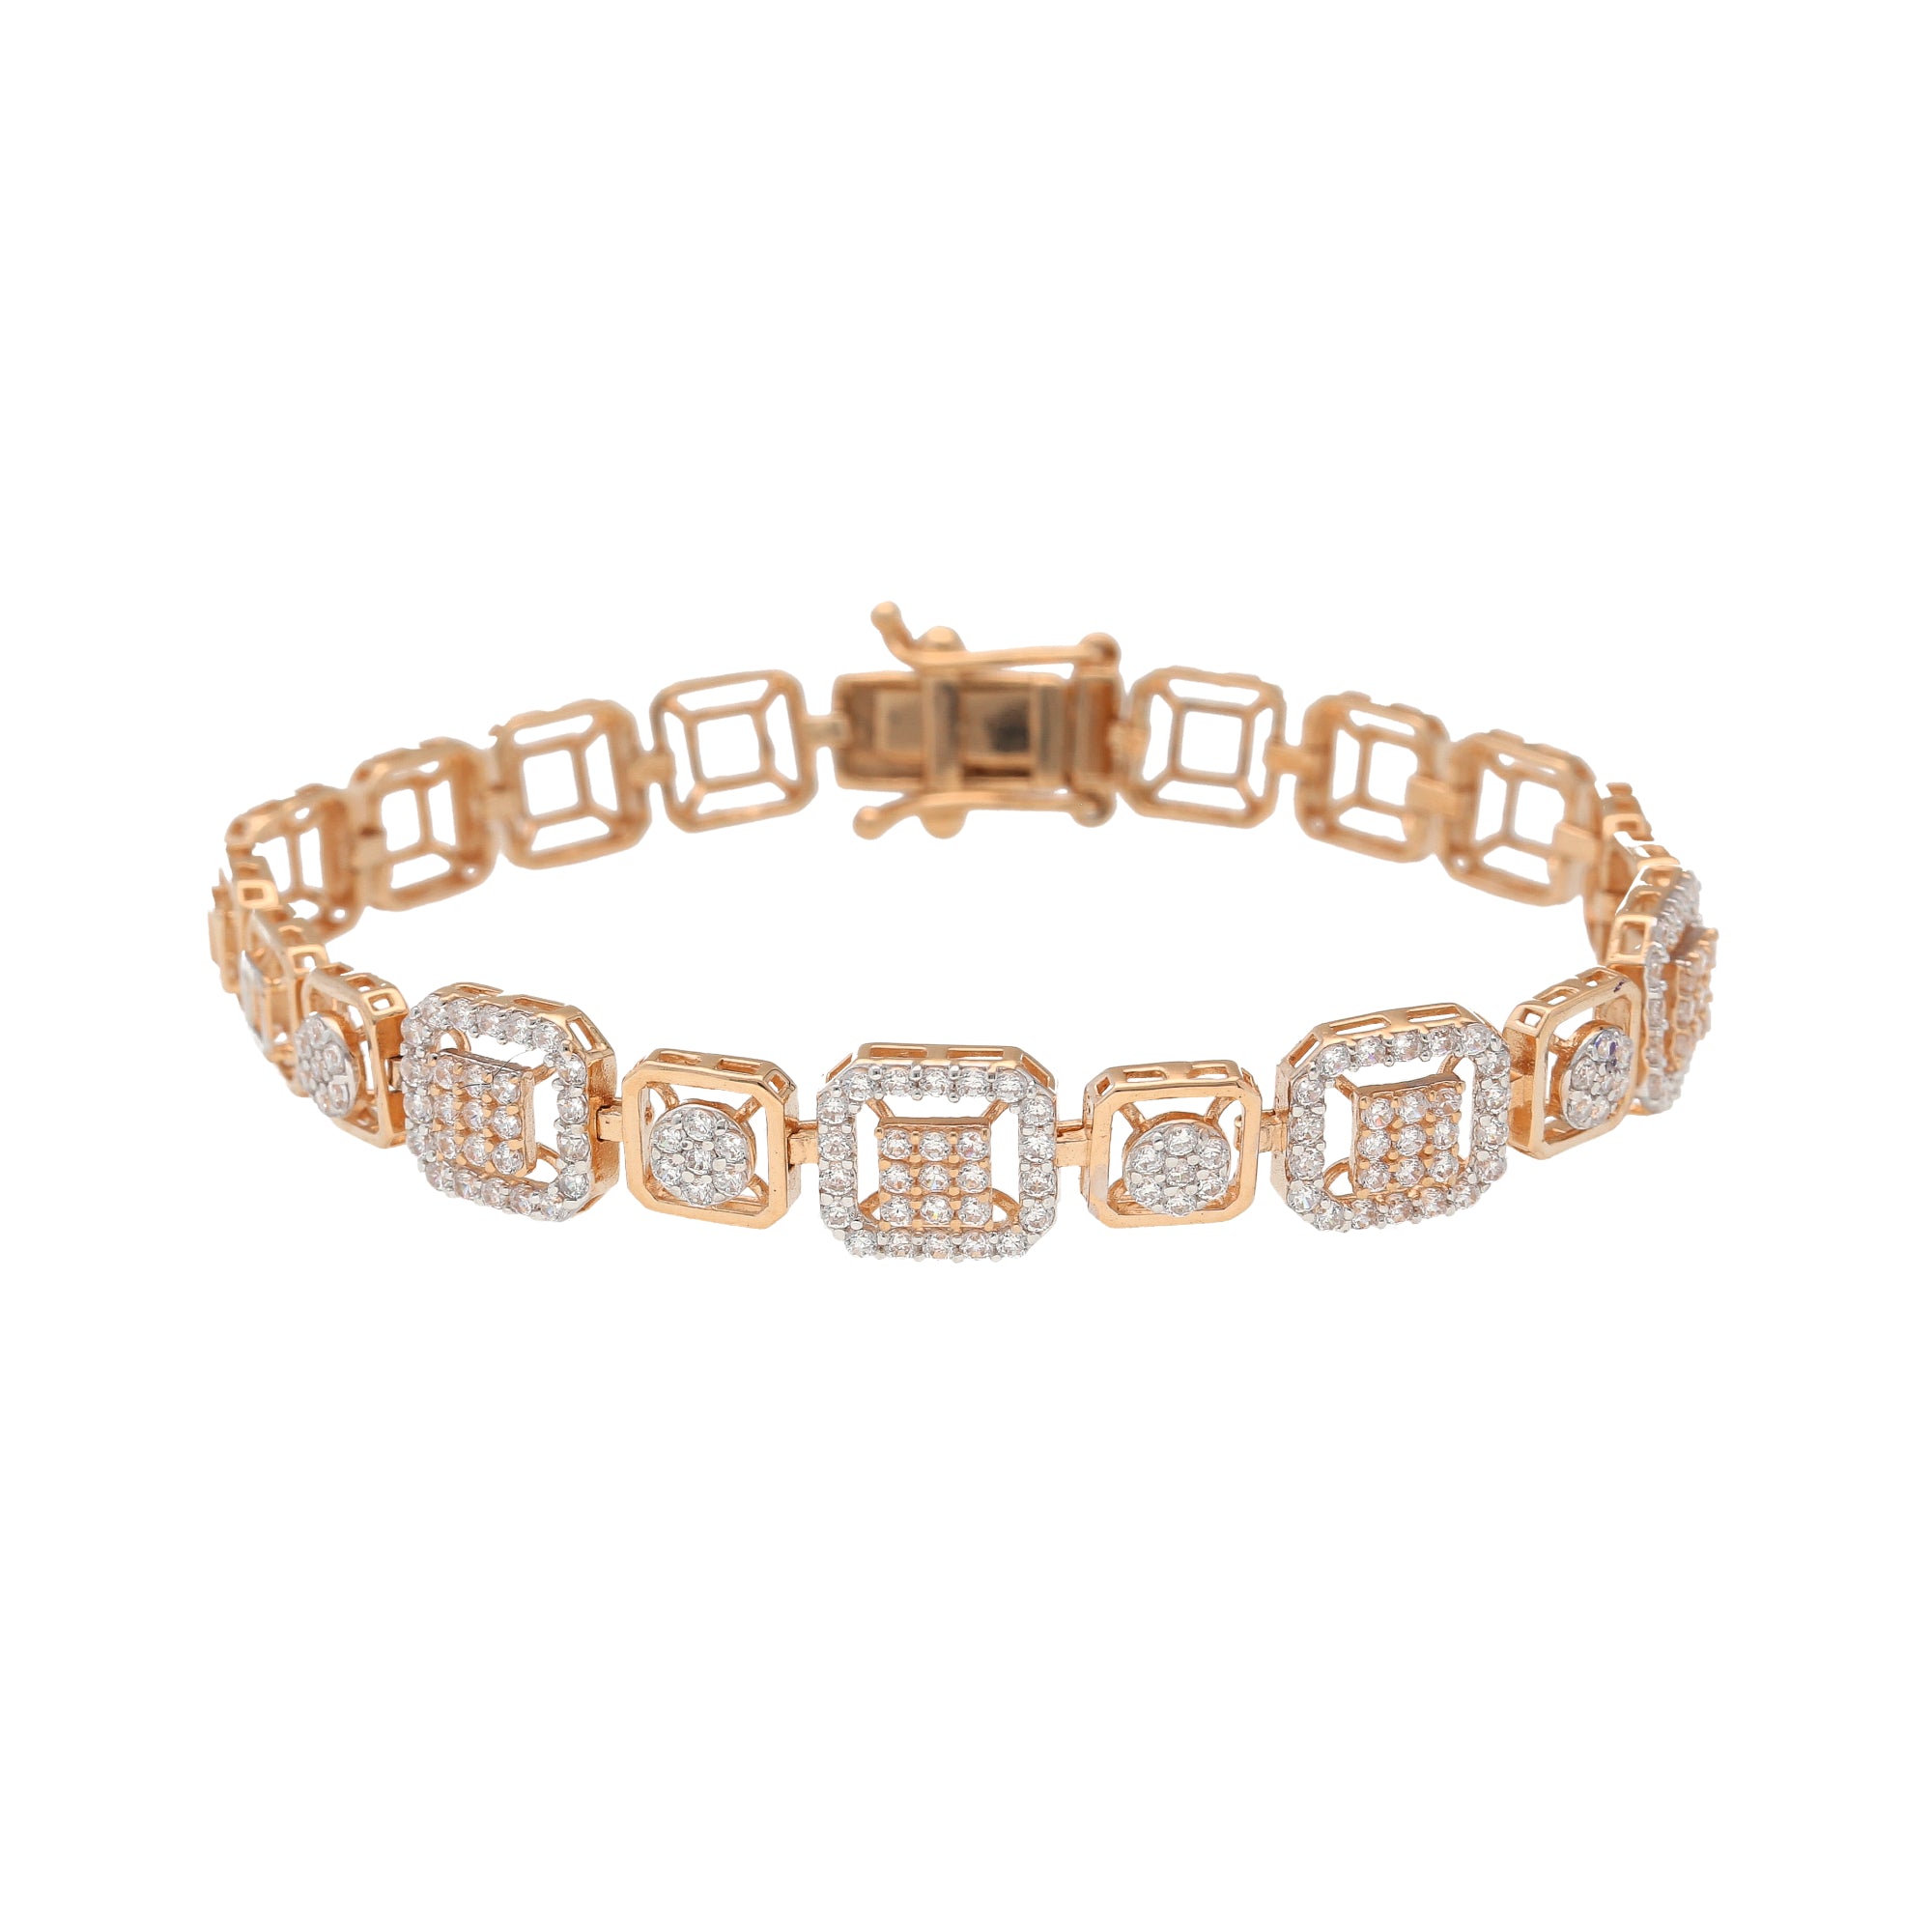 Designer Mens Diamond Cubic Zirconia Tennis Bracelet With Iced Out Bling, Cubic  Zirconia, And 18K Gold Plating Hip Hop Tennis Chain Jewelry From  Endlesssea9208, $31.48 | DHgate.Com